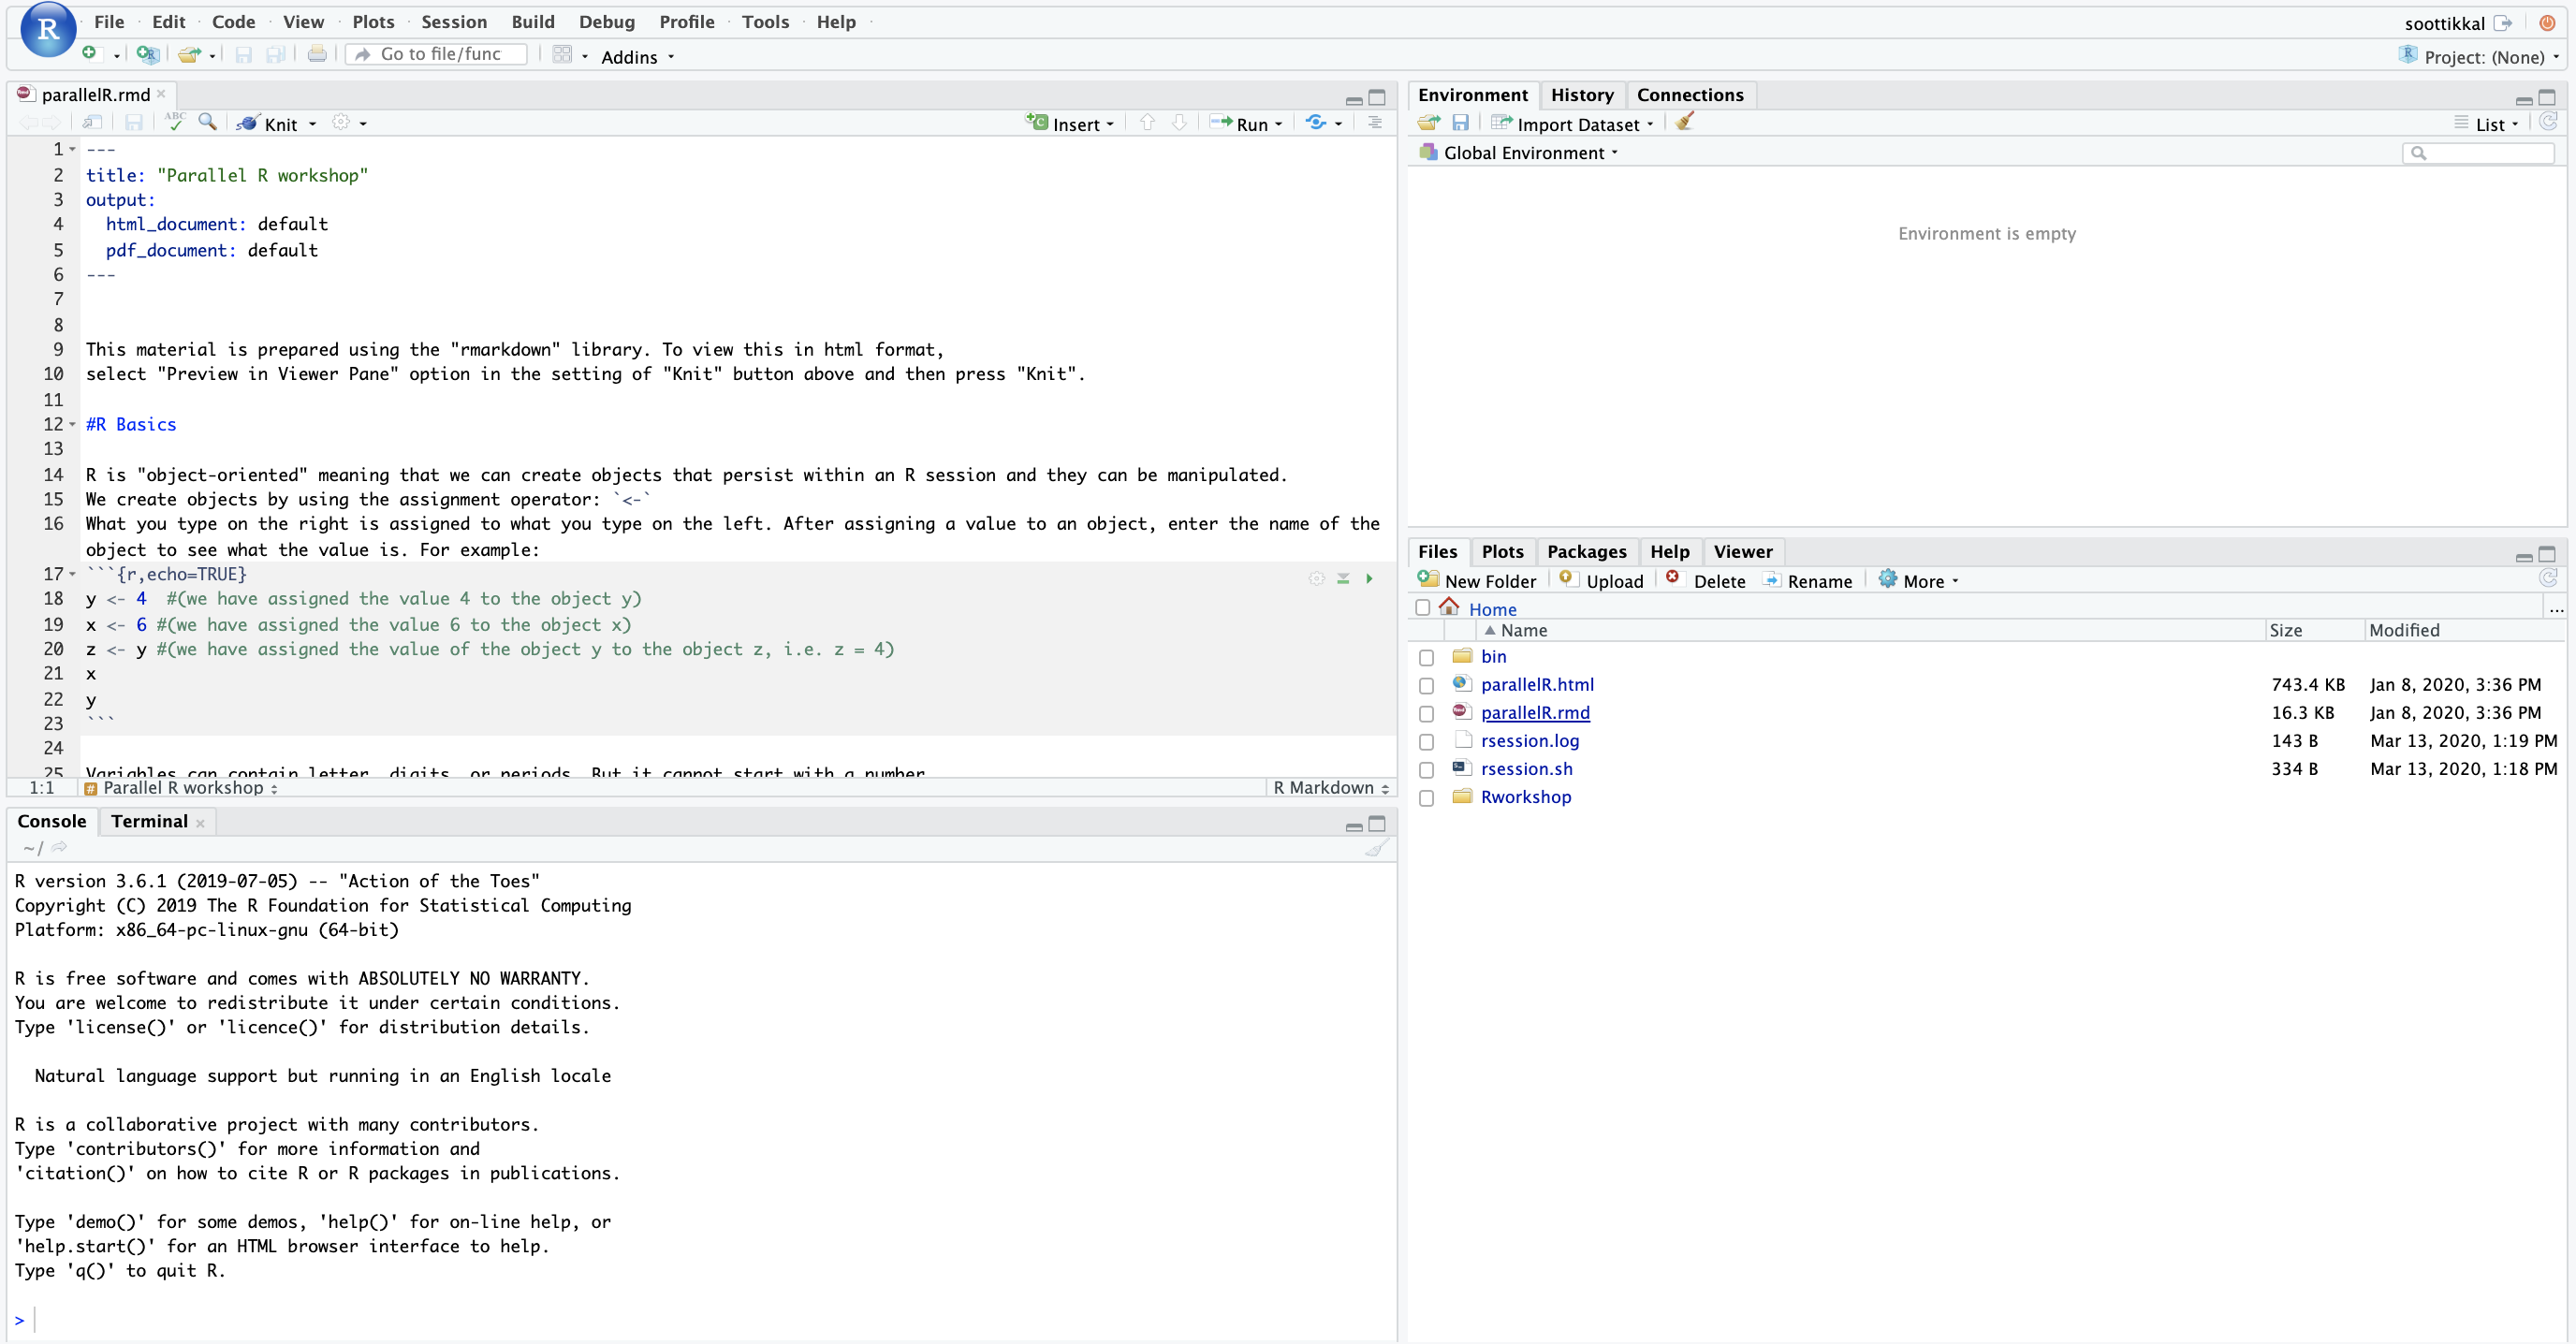 Image of an active RStudio session